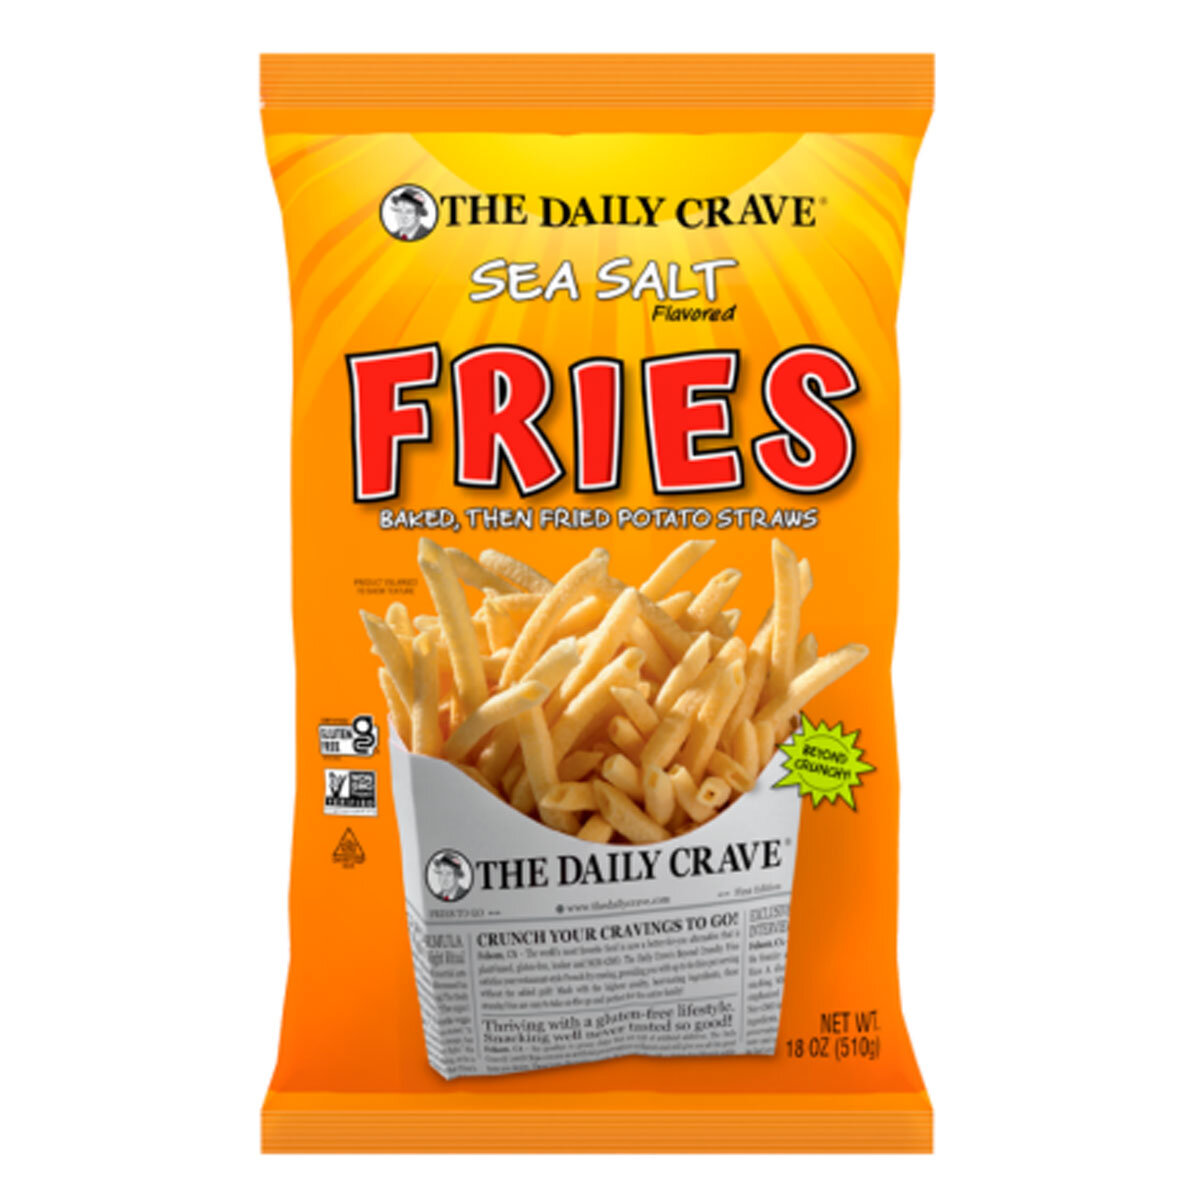 The Daily Crave Sea Salt Fries, 510g